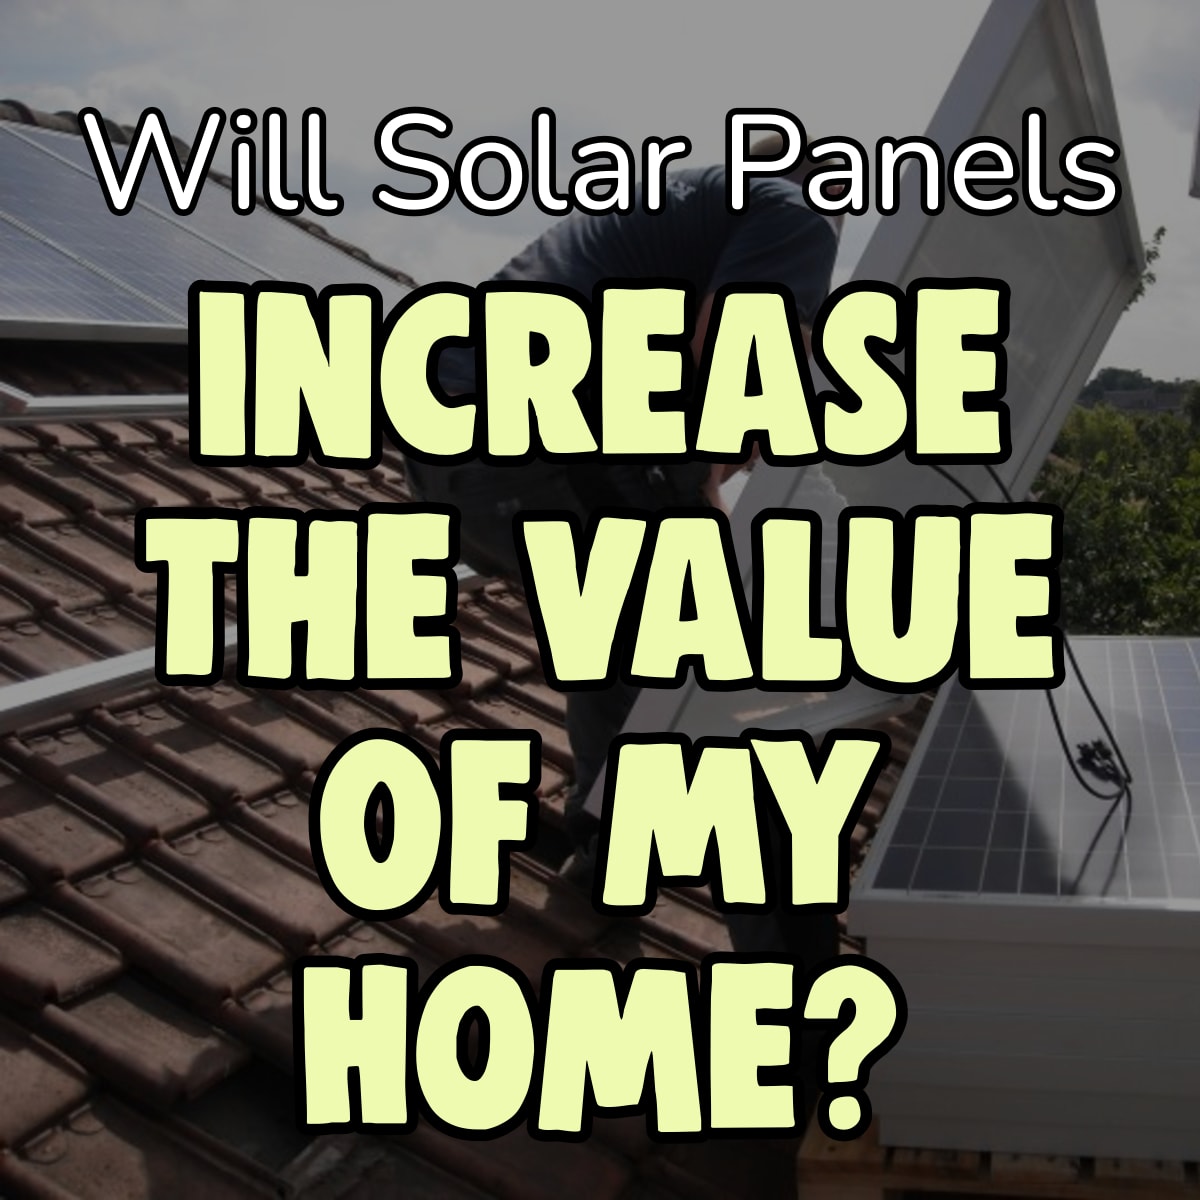 Do solar panels increase the value of your home? Are solar panels worth it?